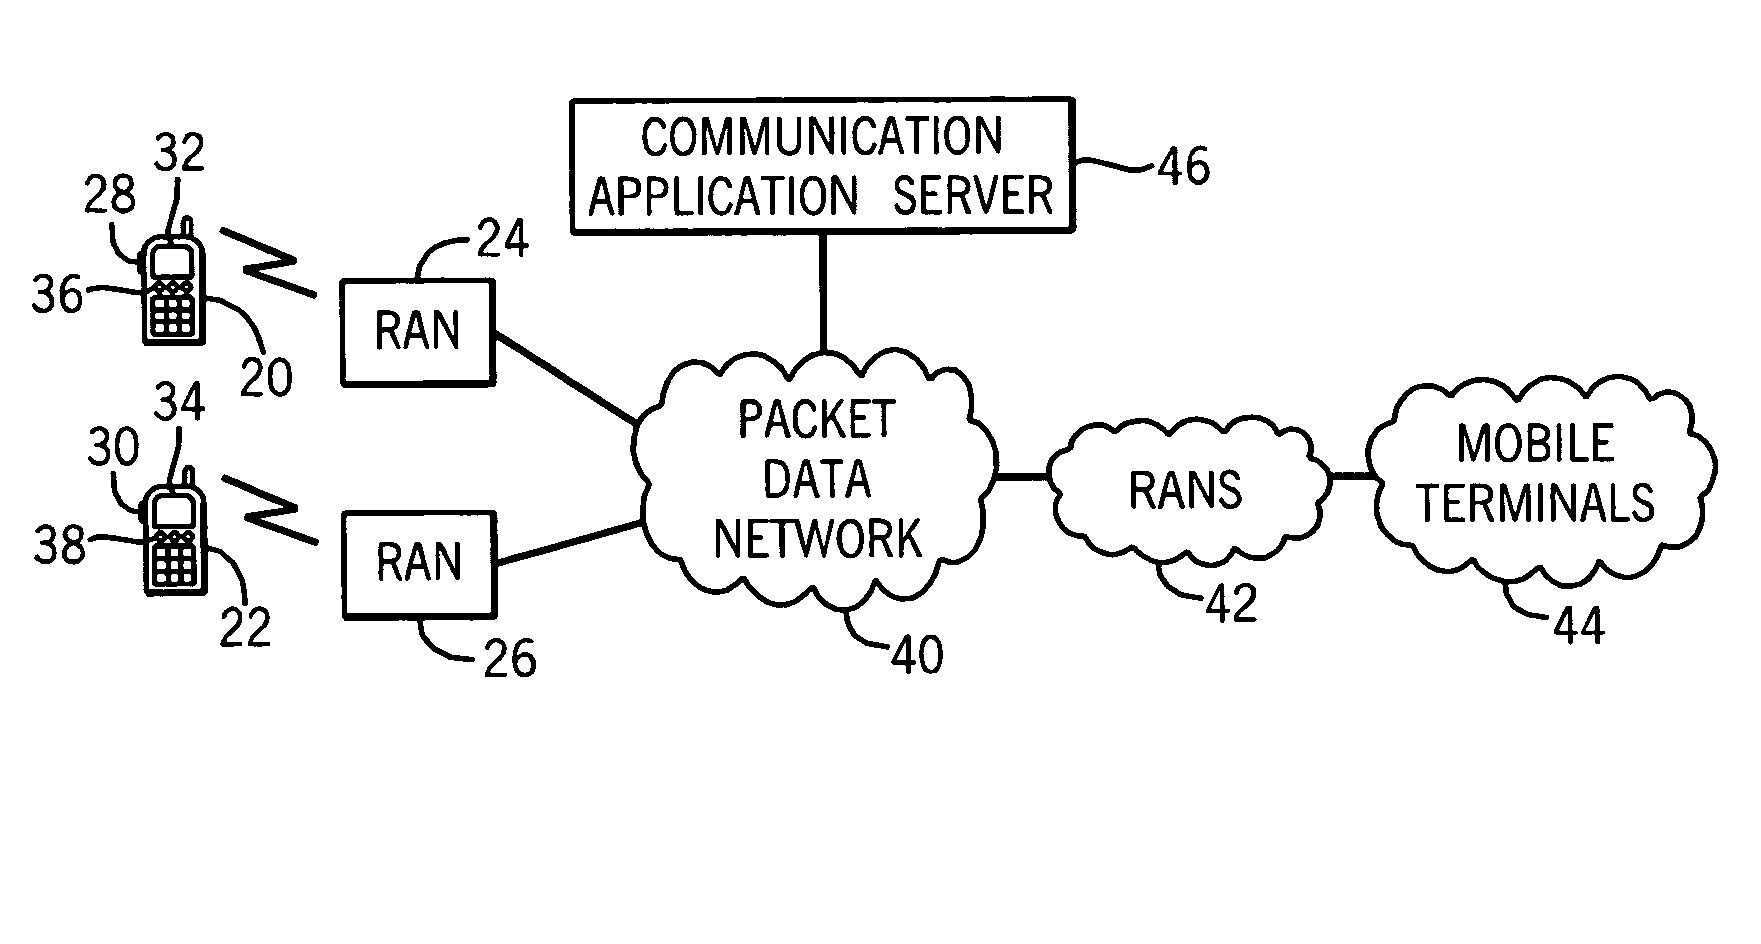 Voice message storage in a push-to-talk communication system